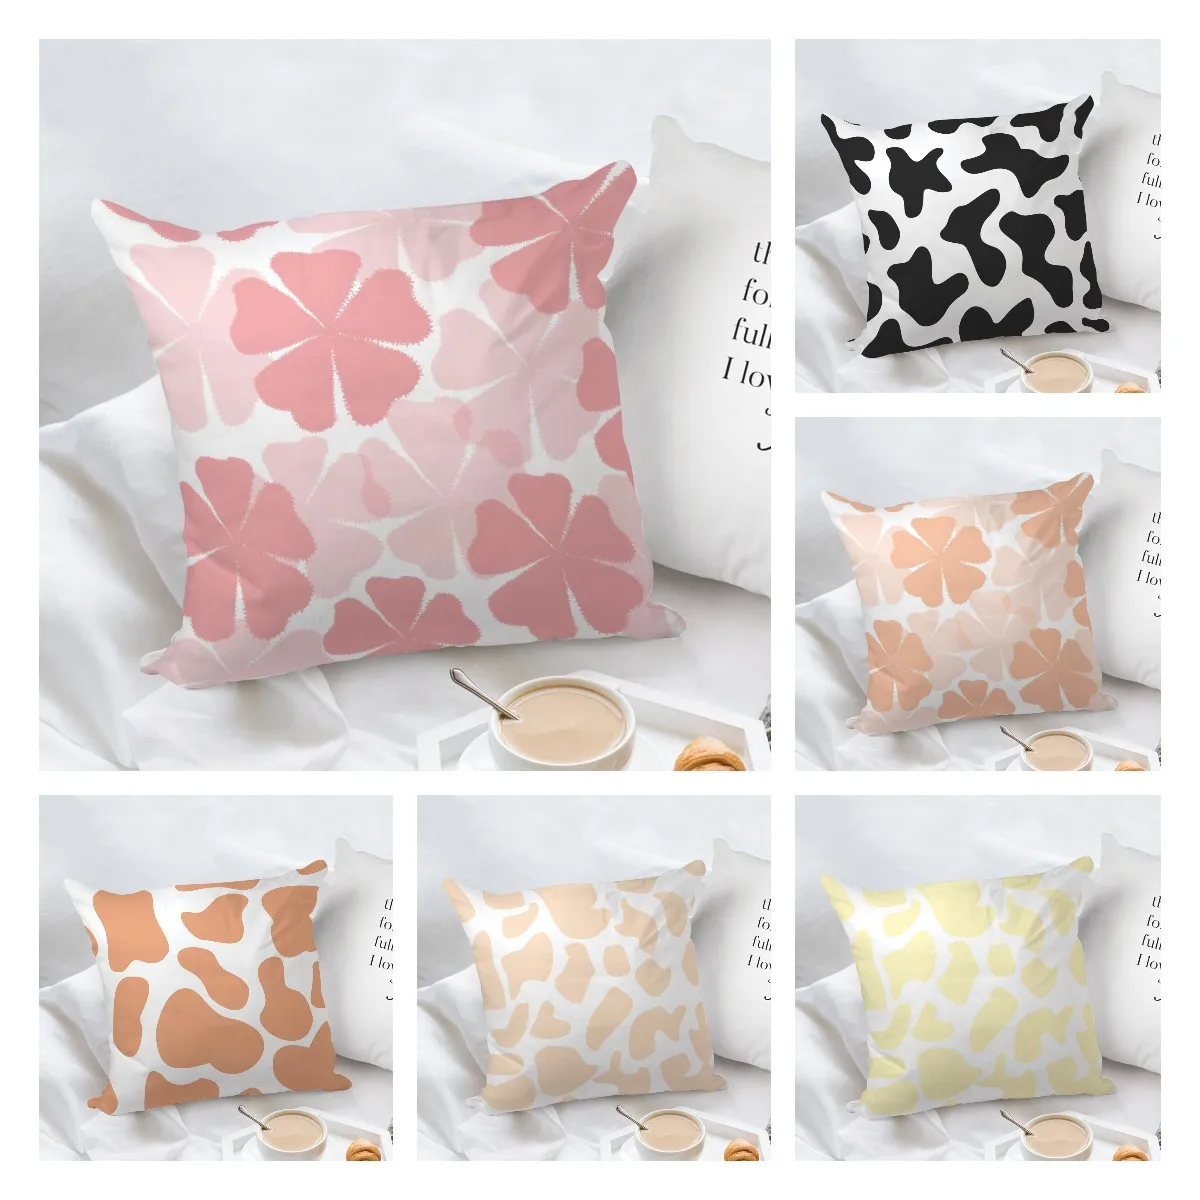 Decorative Colored Spots Pillowcase Polyester Square Cushion Cover Throw Pillows Bed Couch Home Decor Dakimakura